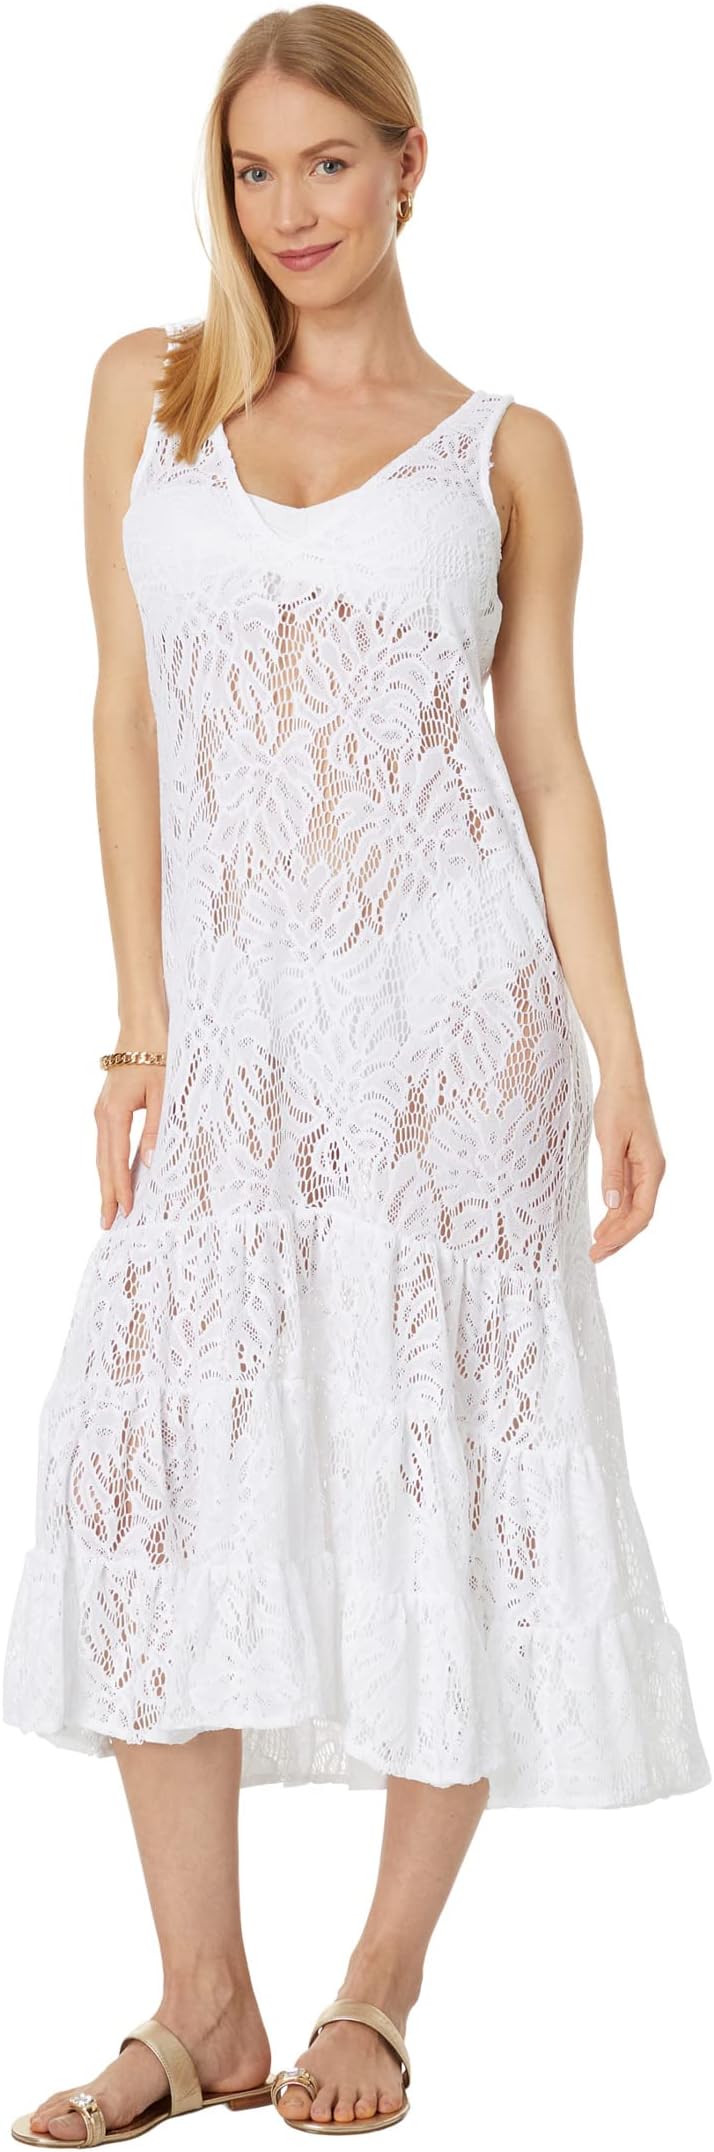 Накидка Finnley Lace Cover-Up Lilly Pulitzer, цвет Resort White Paradise Found Lace